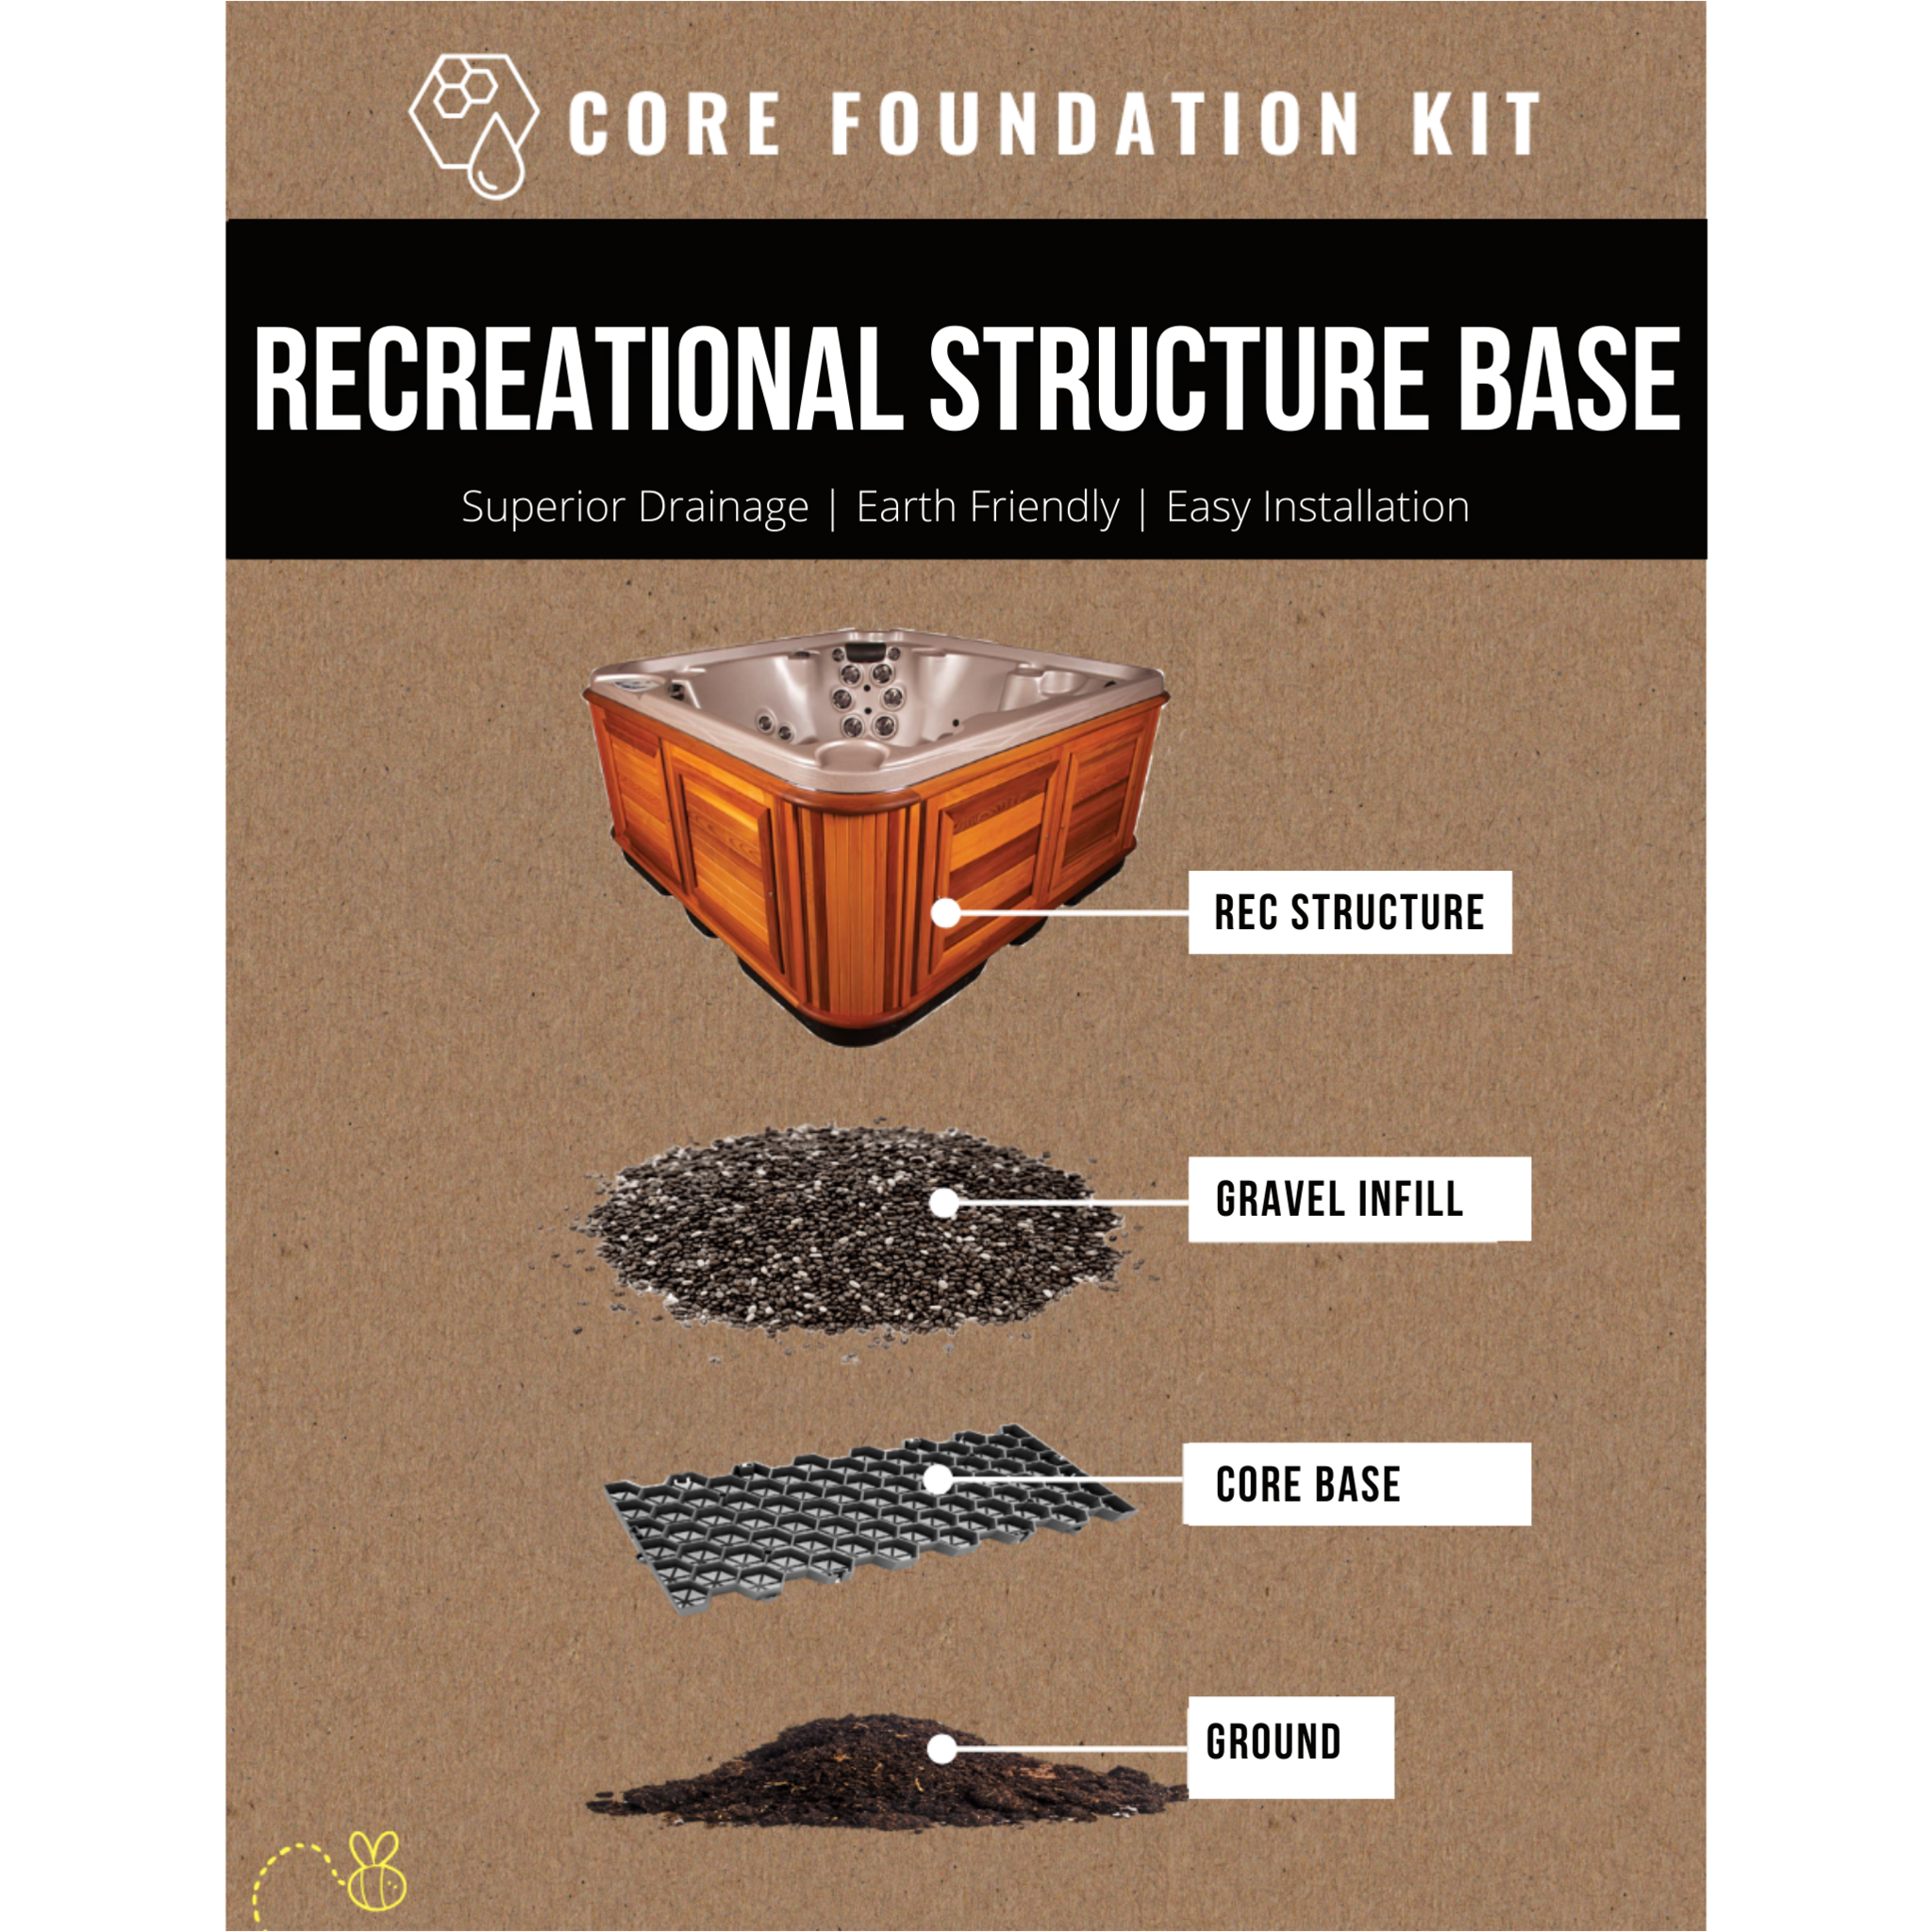 Recreational Foundation Kit | ~62 SQ. FT | FREE SHIPPING